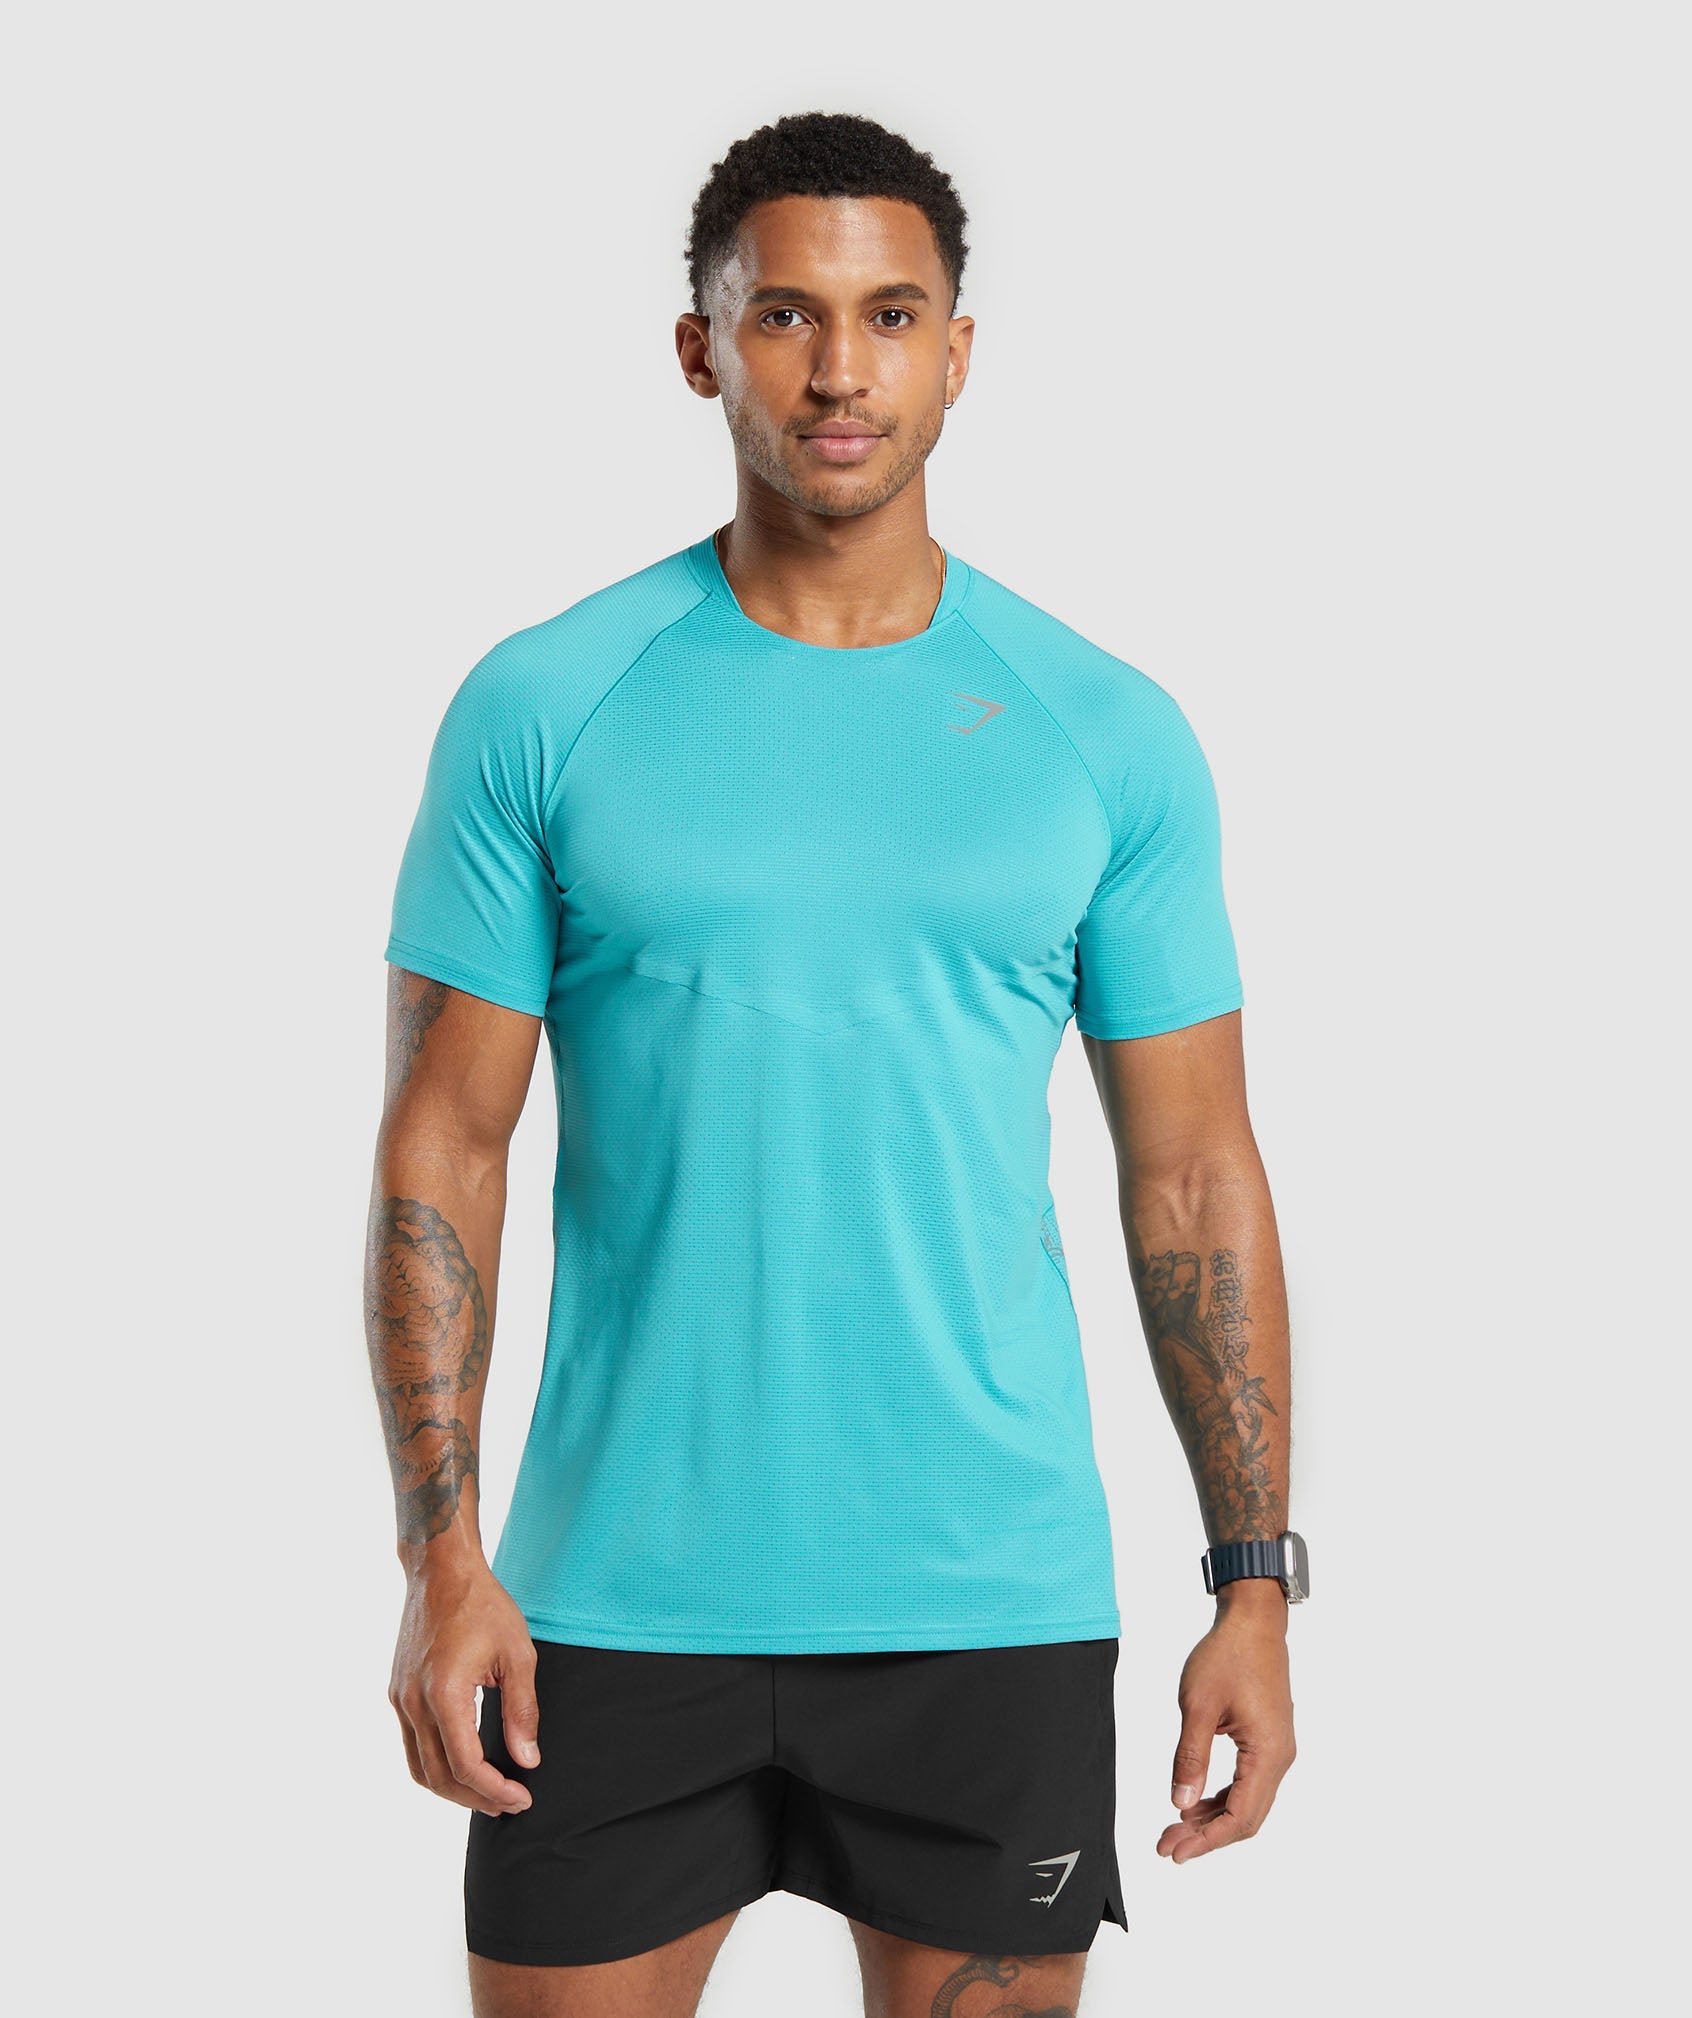 Speed T-Shirt in Artificial Teal